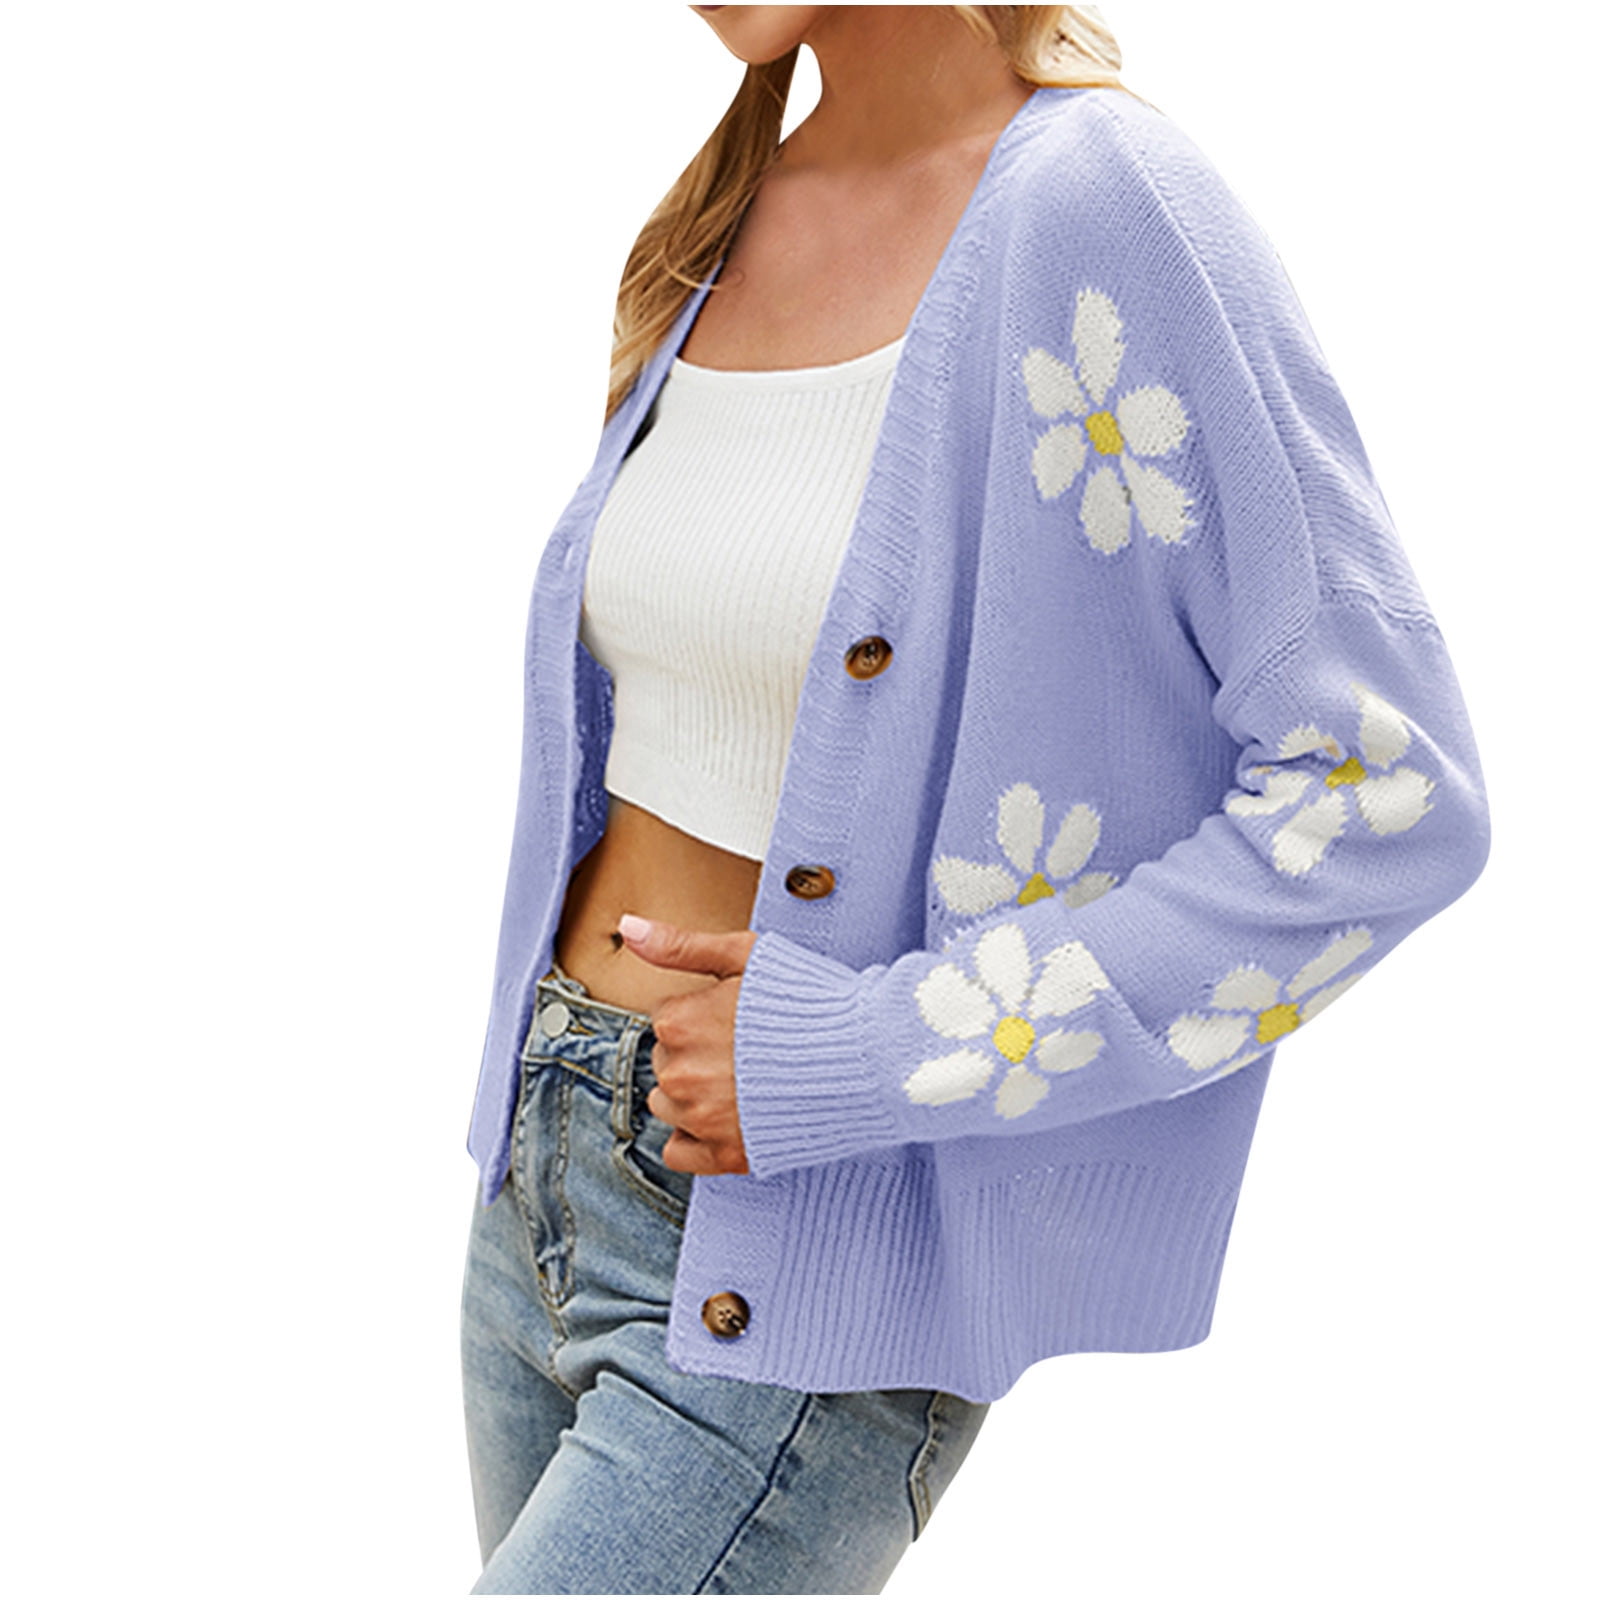 SHEIN Girls Pink Daisy Floral Pattern Cardigan Sweater Button Front Size  11-12